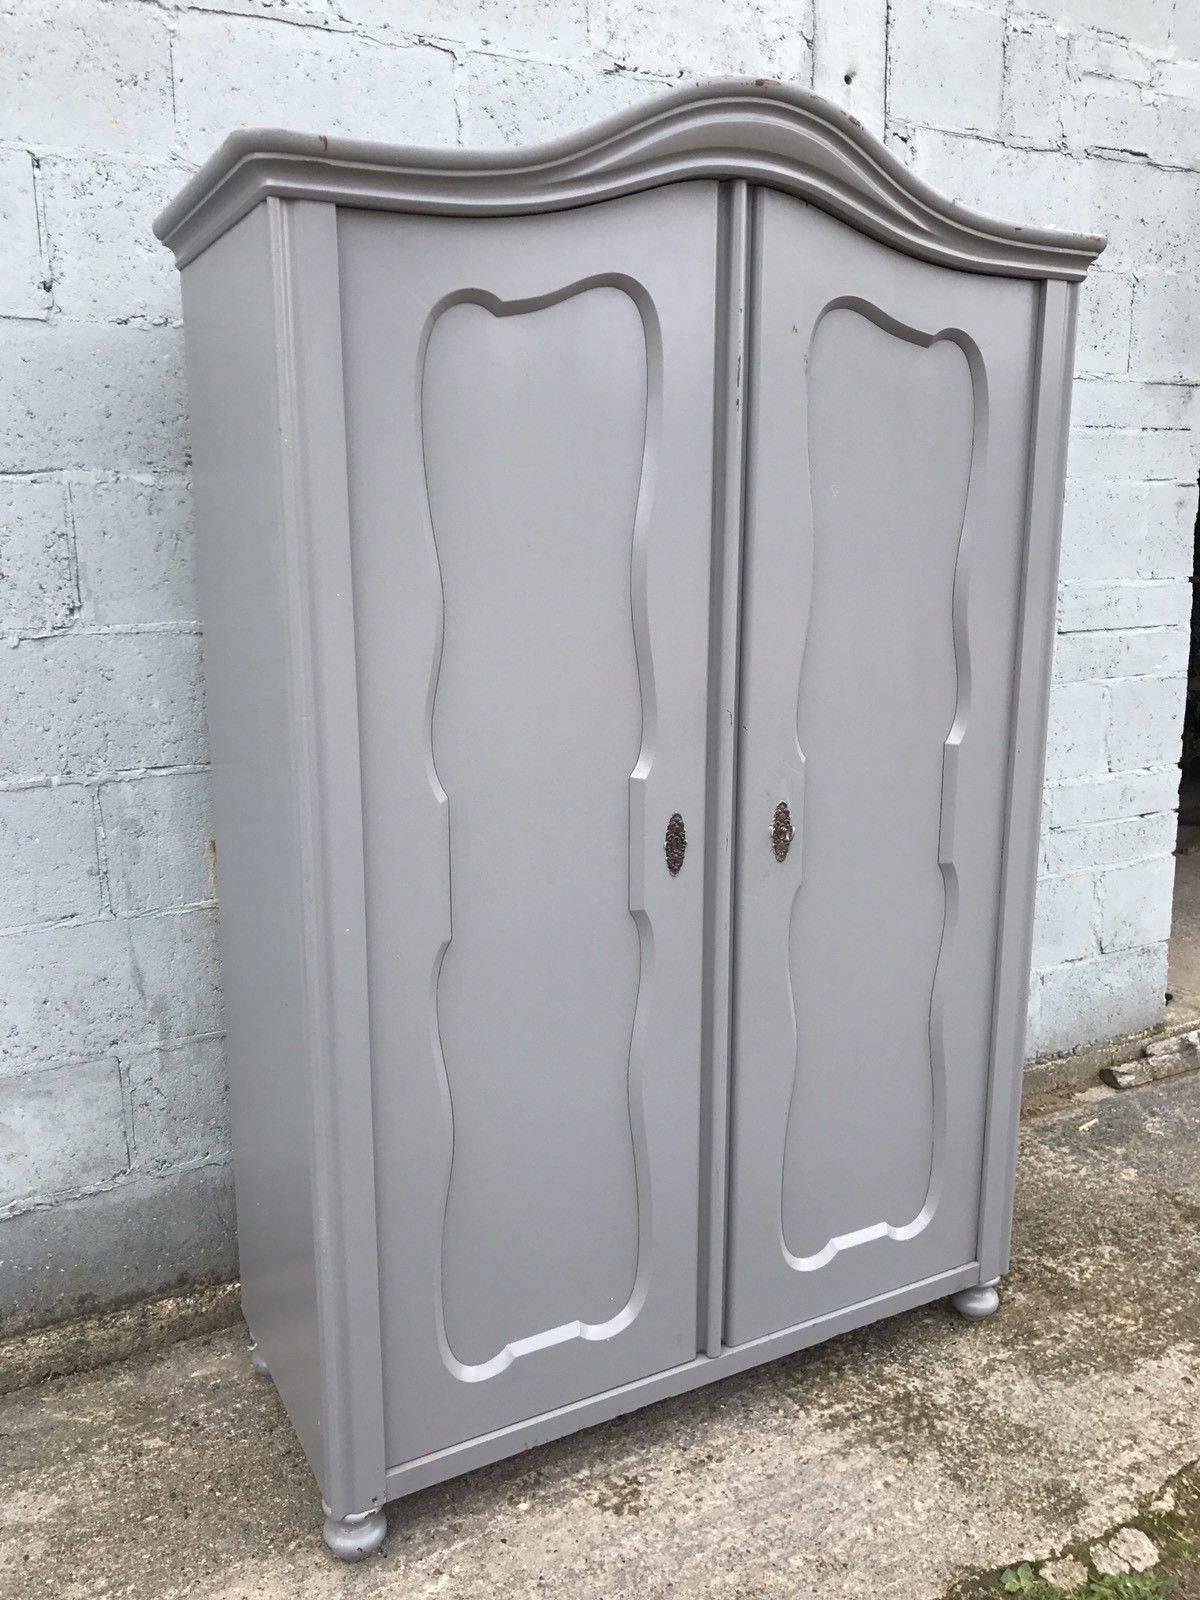 This is a beautiful French larder/cupboard or wardrobe.



It's been painted in grey color, slightly distressed.



Double carved door opens up to good storage. Can be fitted with shelves or hanging rails as an extra, if